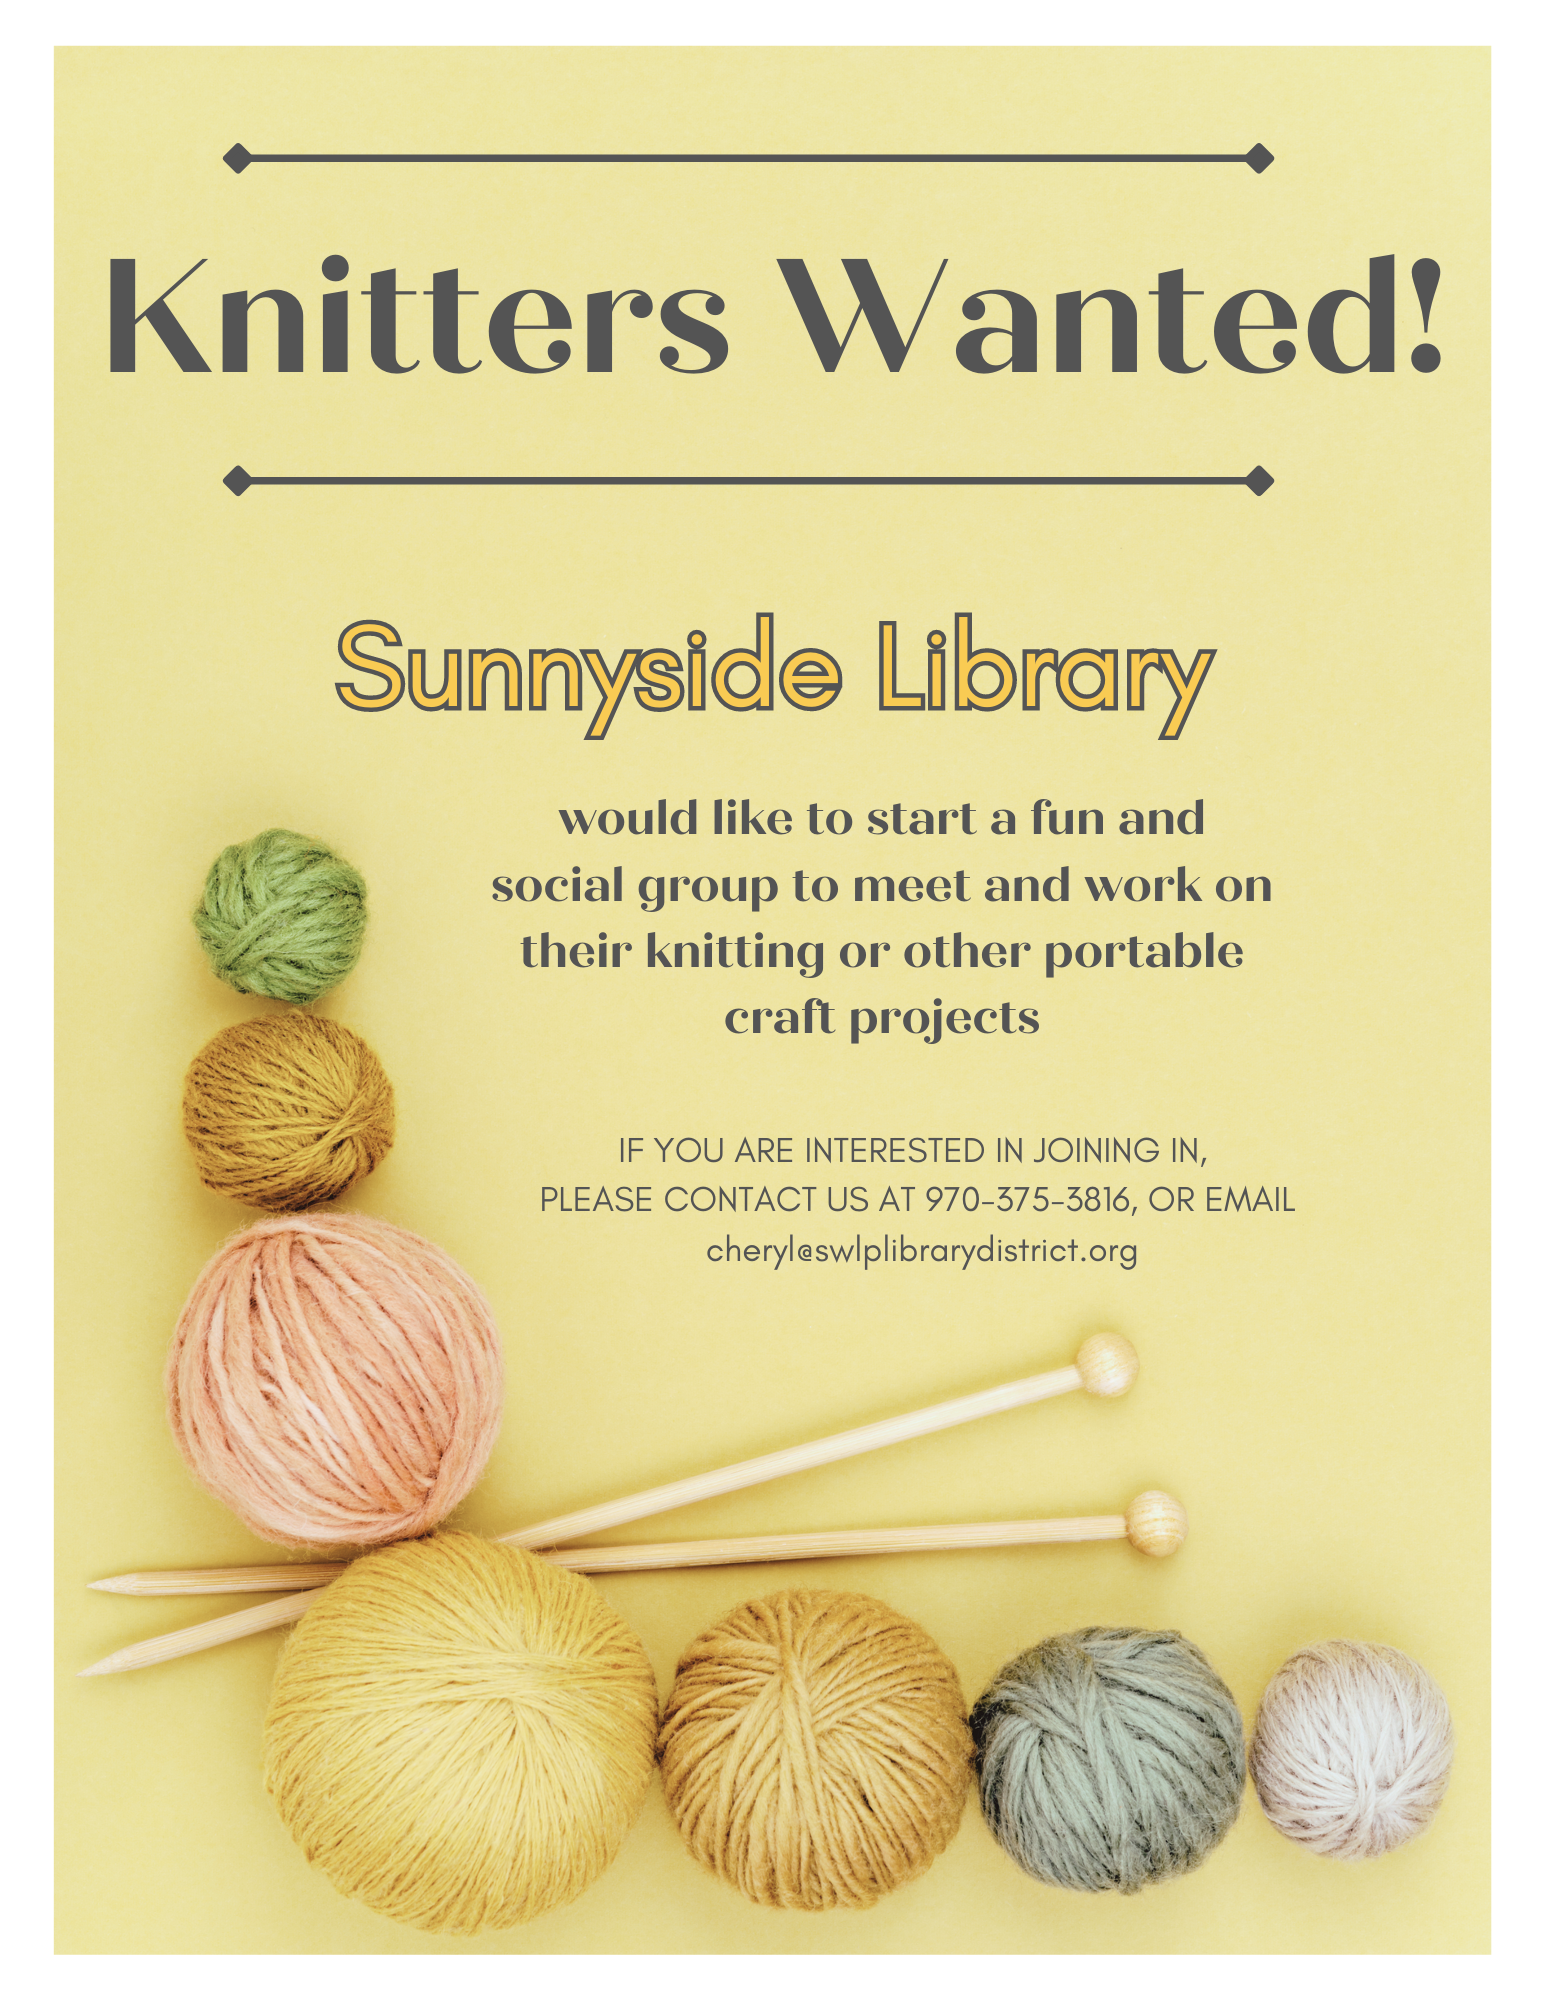 Skeins of yarn and knitting needles surrounded by content saying "Knitters Wanted"